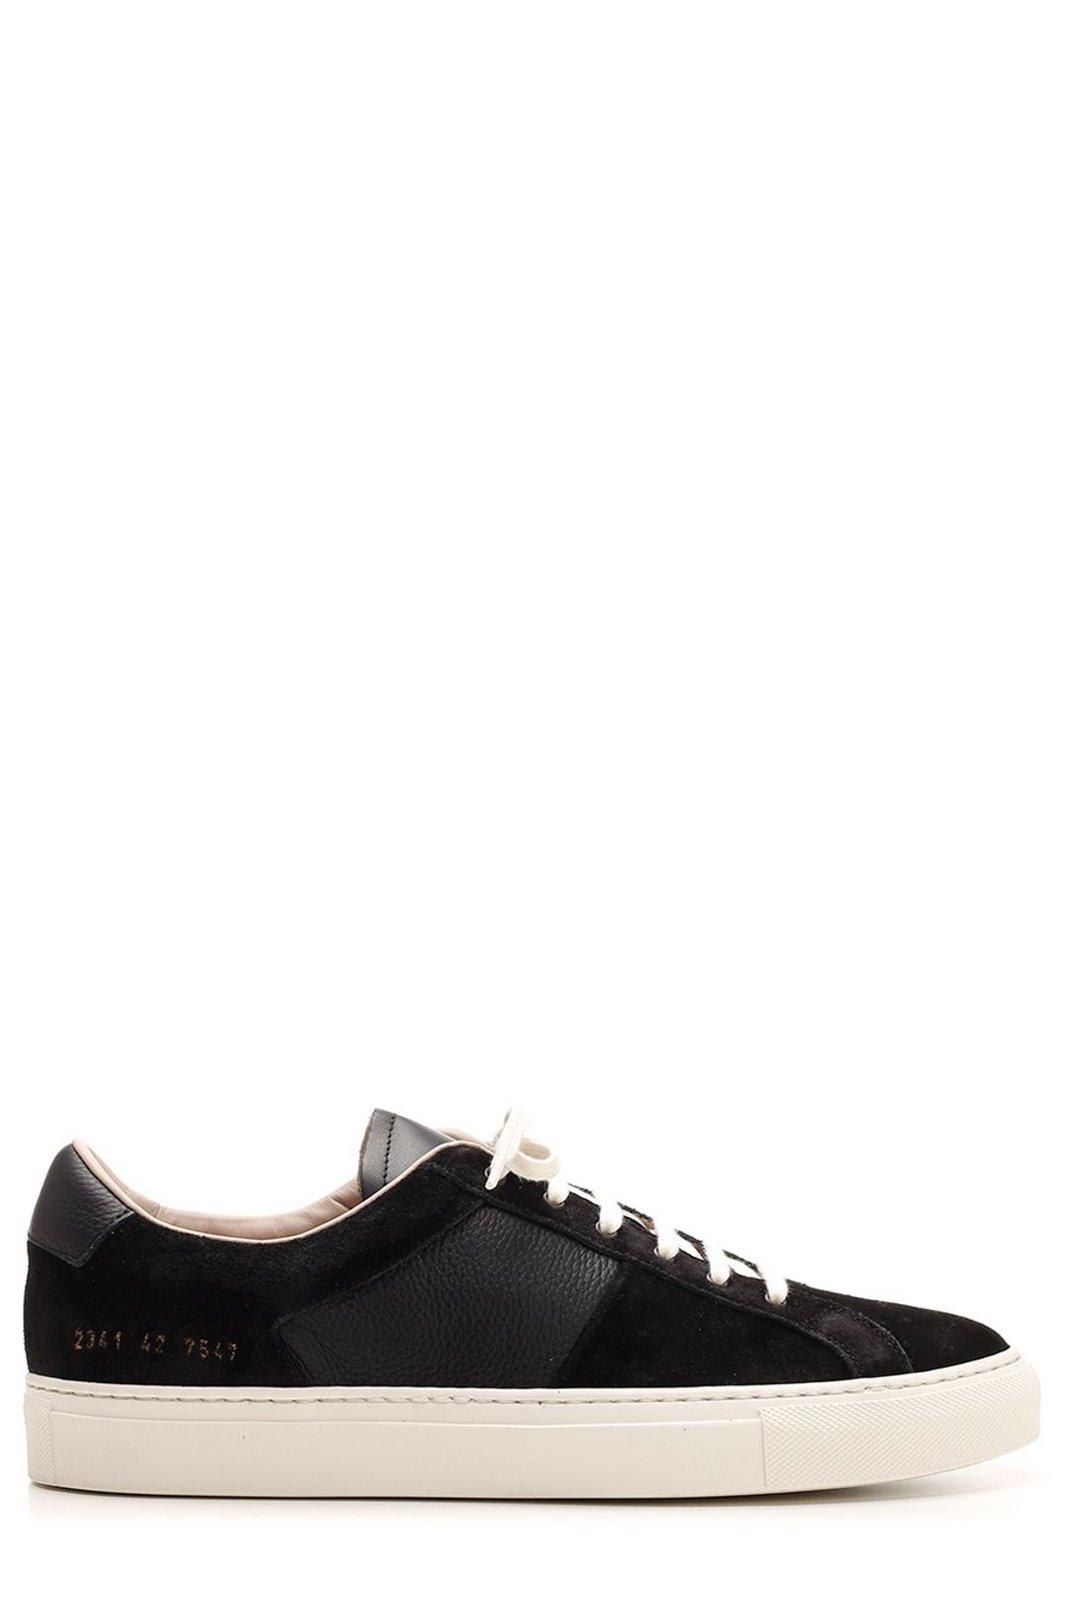 Common Projects Achilles Lace-up Sneakers